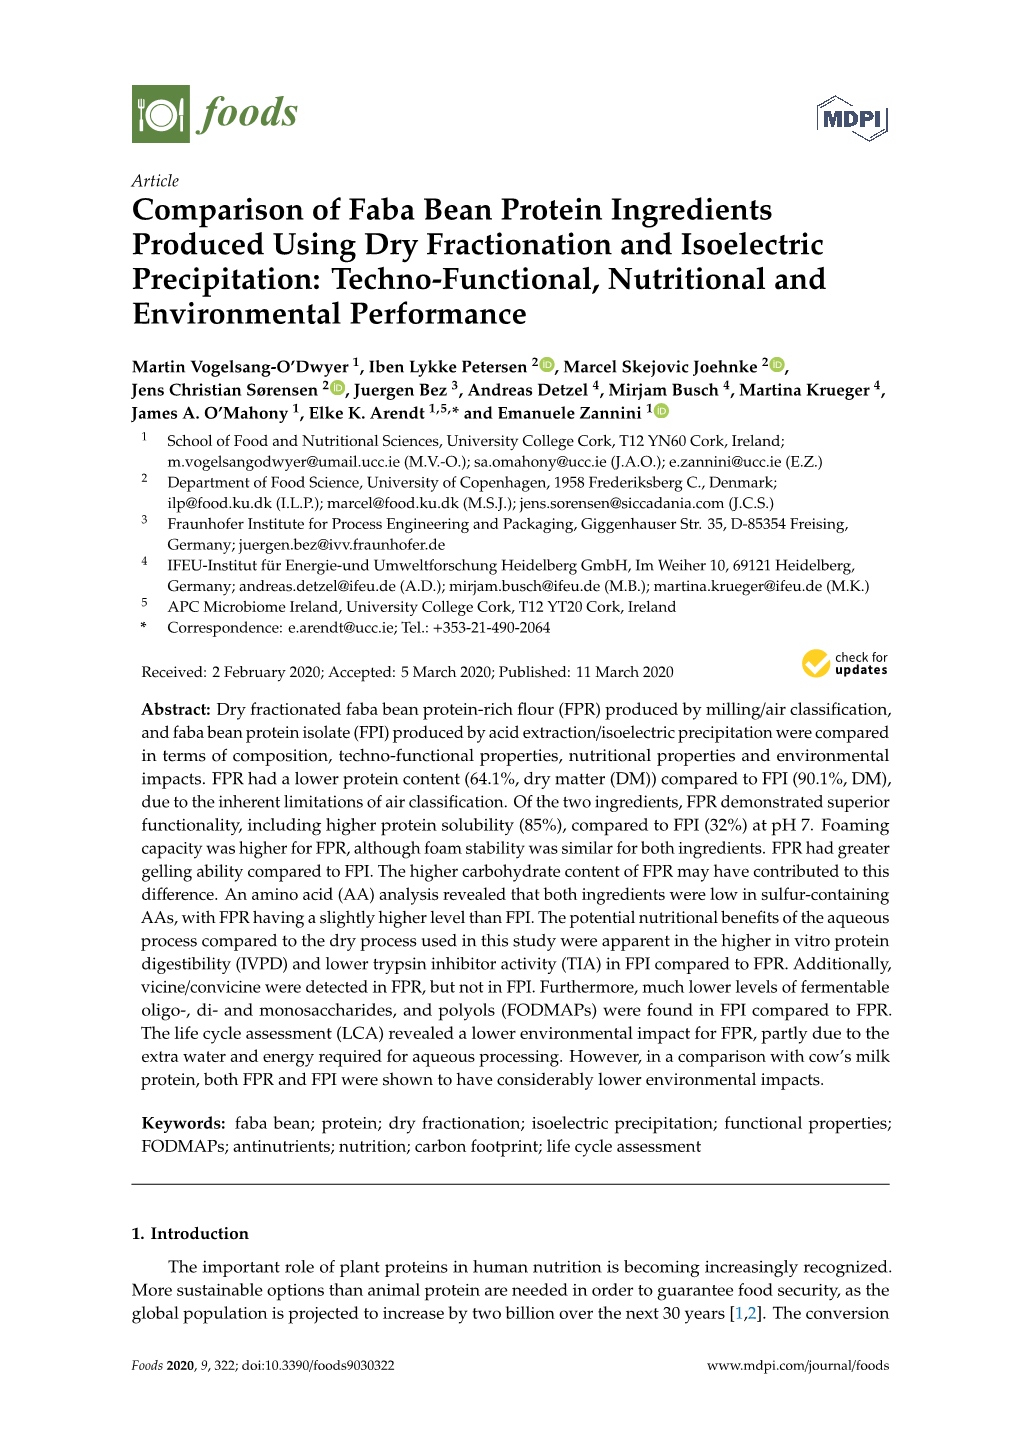 Comparison of Faba Bean Protein Ingredients Produced Using Dry Fractionation and Isoelectric Precipitation